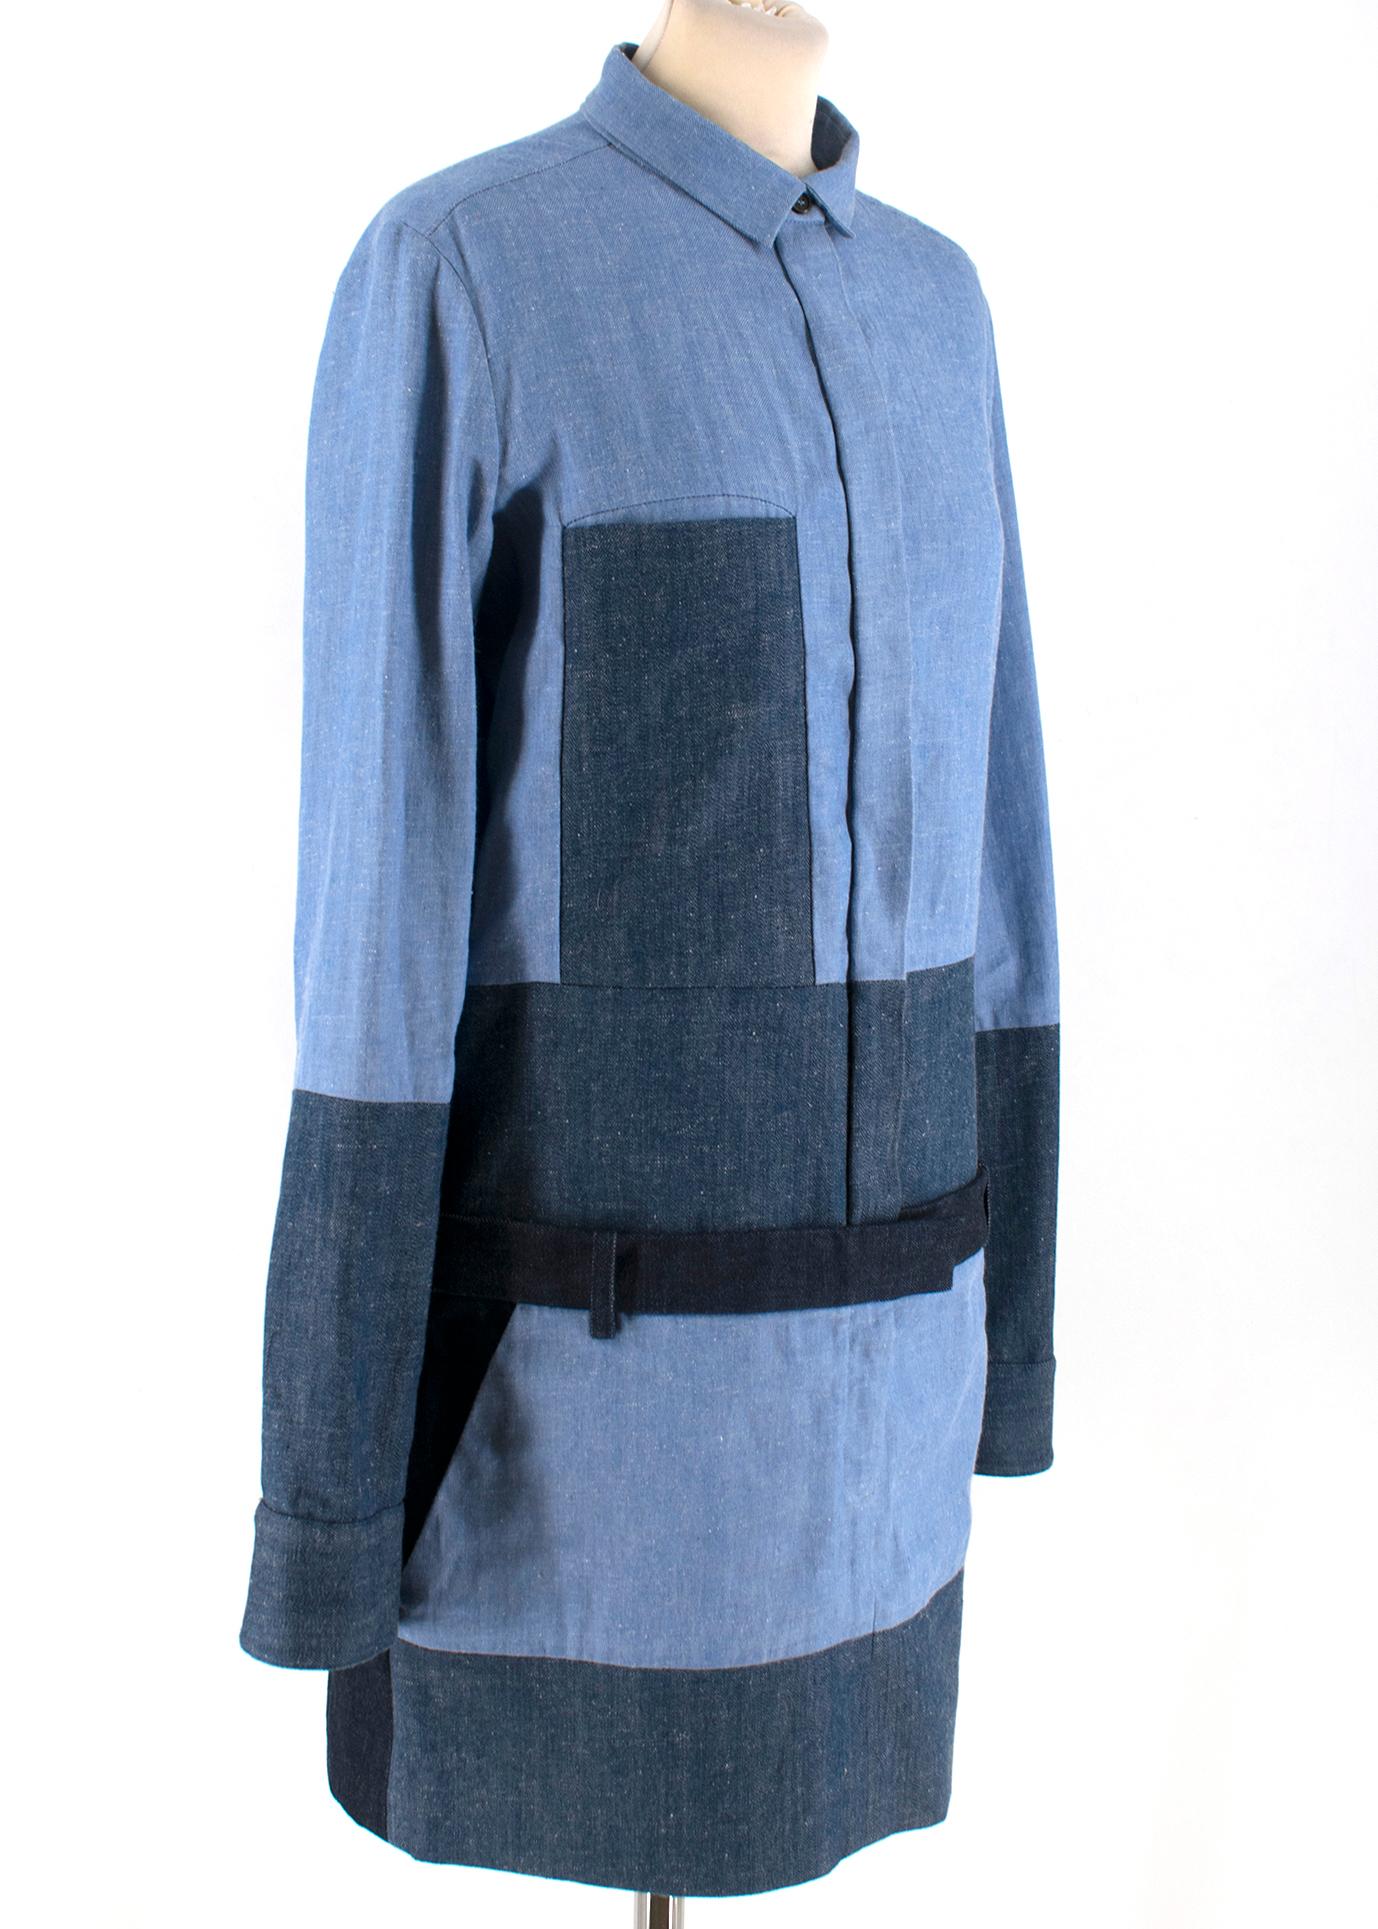 Celine by Phoebe Philo Denim Patchwork Mini Dress

3 working pockets 
Top front button closure 
Bottom front zipper closure

Measurements are taken laying flat, seam to seam. 
Approx. Sleeve length (from shoulder) 66cm
Waist 46cm
Hips 50cm
Full